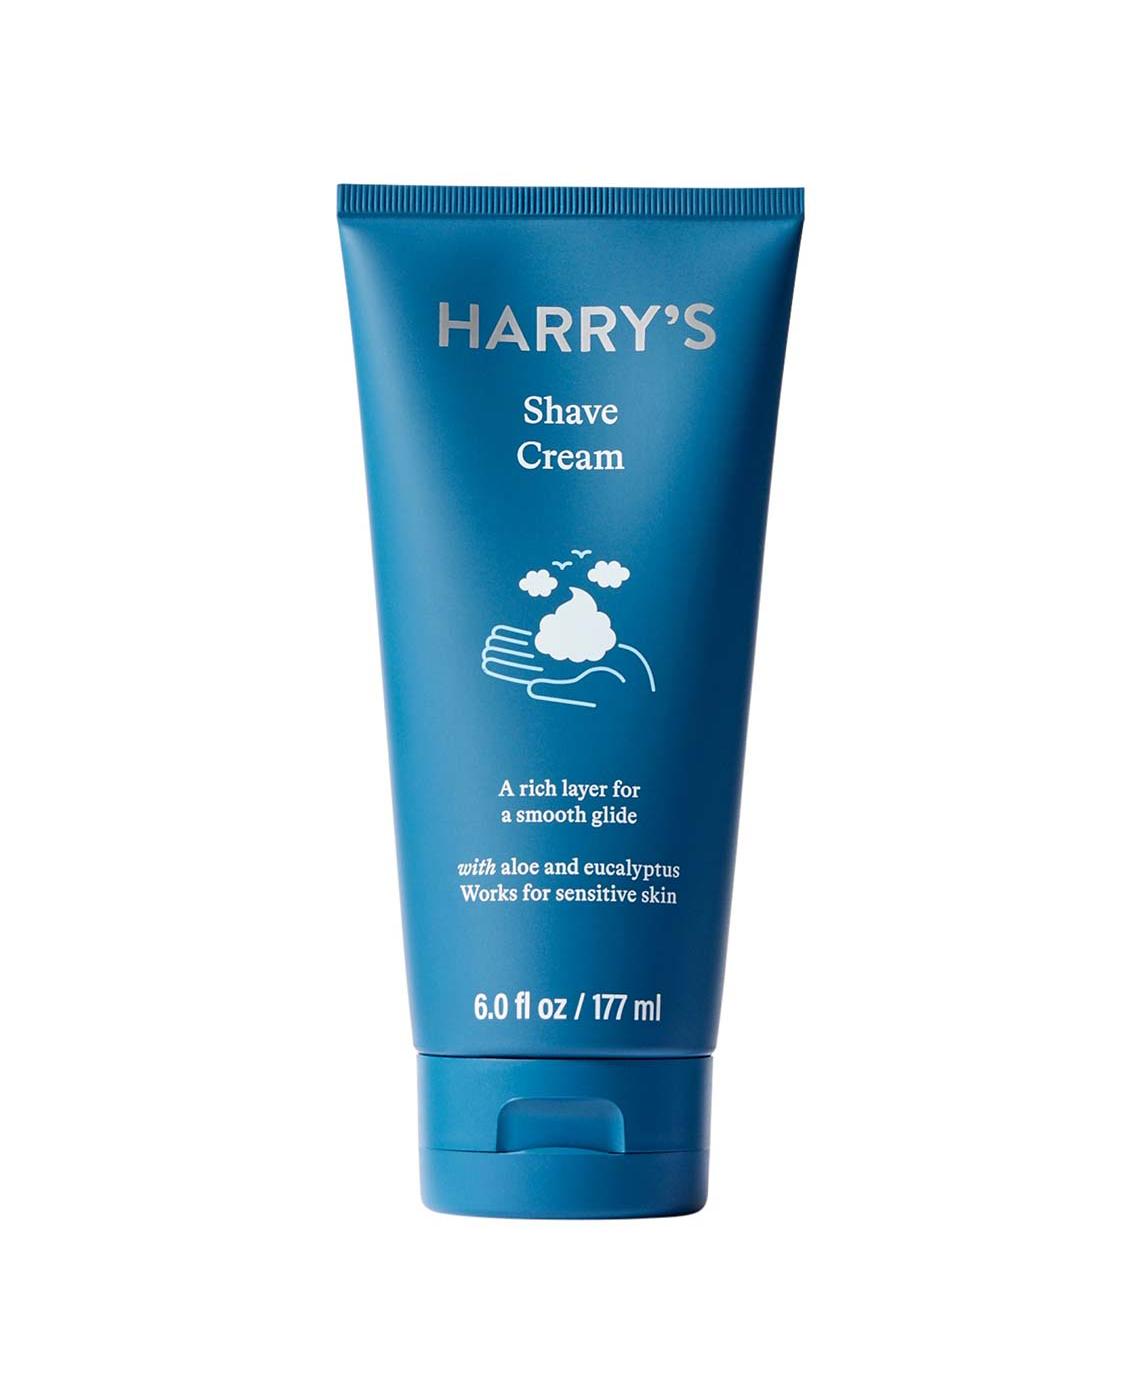 Harry's Shave Cream; image 1 of 2